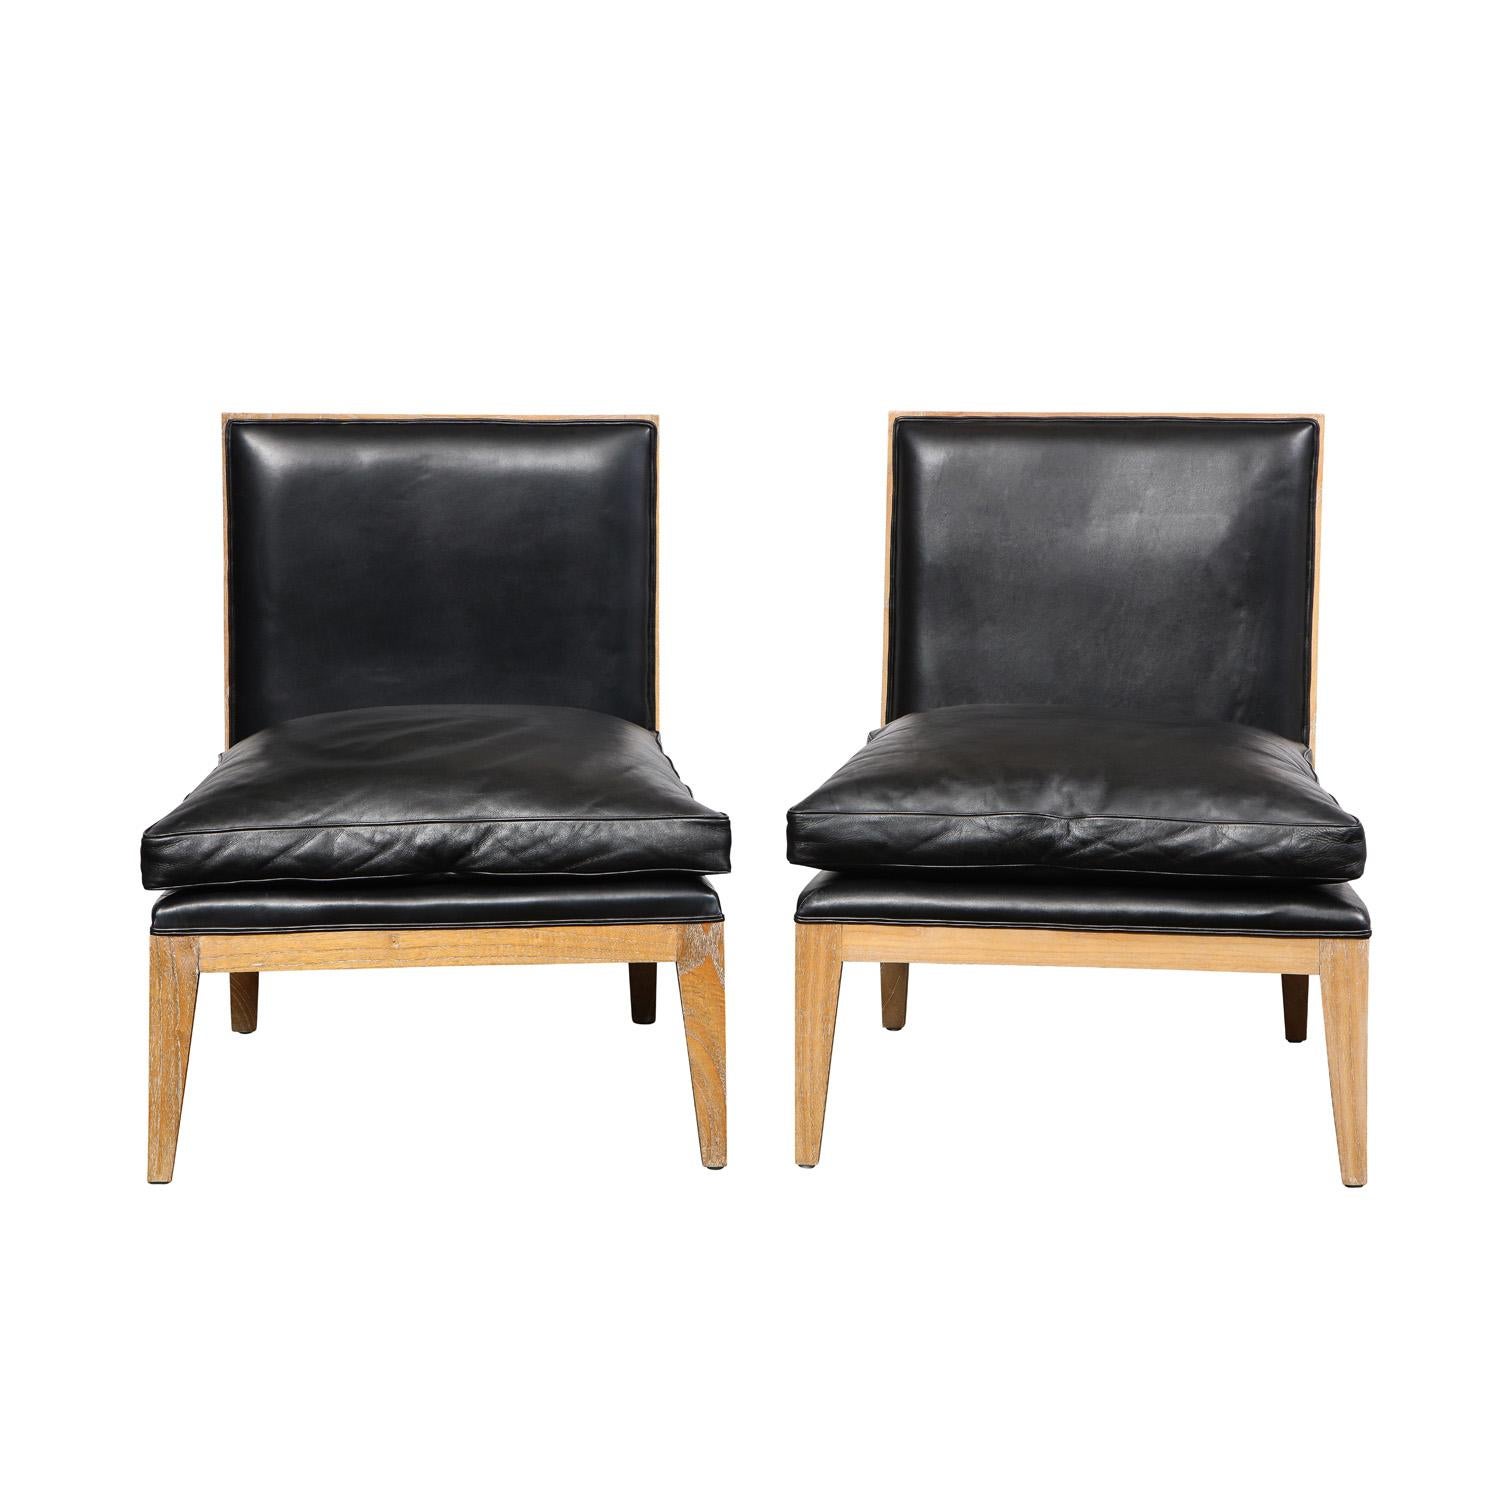 Pair of elegant slipper chairs in cerused oak with black leather seats and back, French 1960's. The combination of materials is very chic. These are beautifully made.